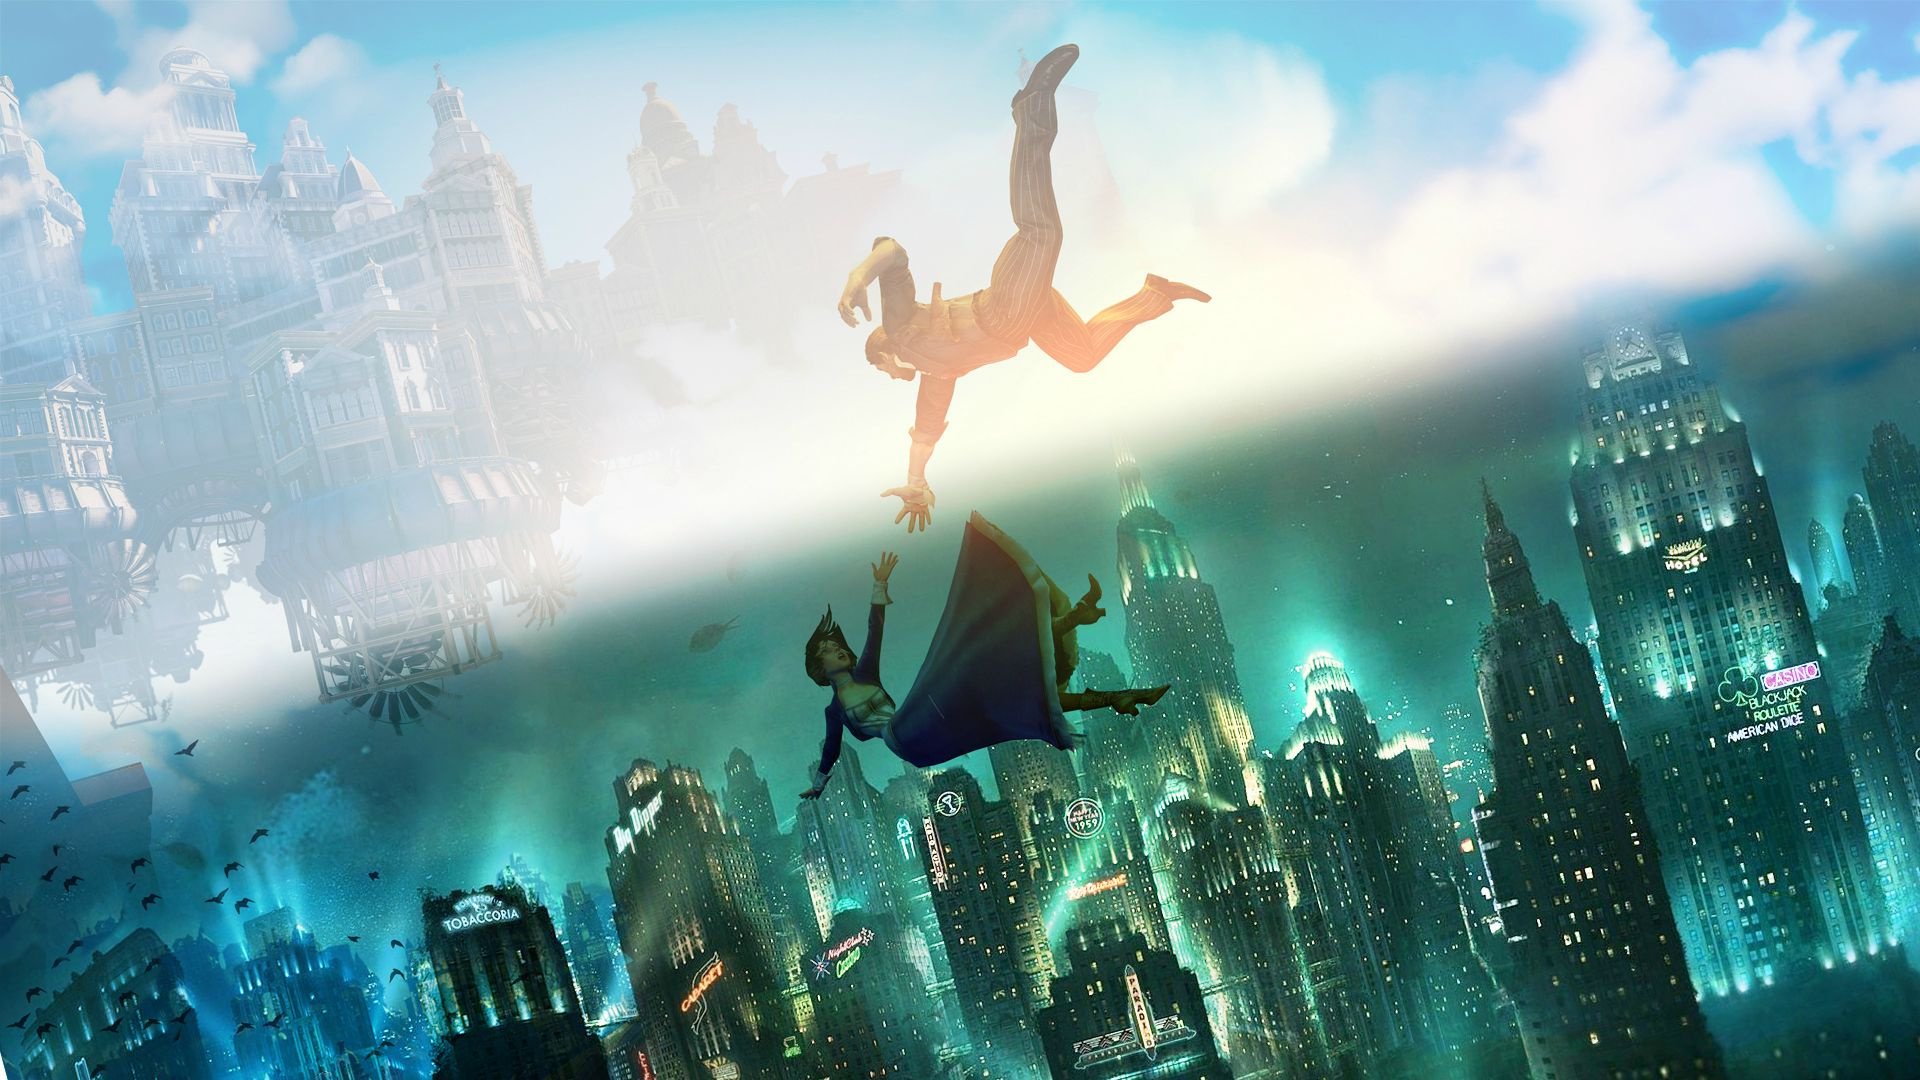 bioshock-the-collection-is-now-ps4-s-worst-kept-secret-push-square